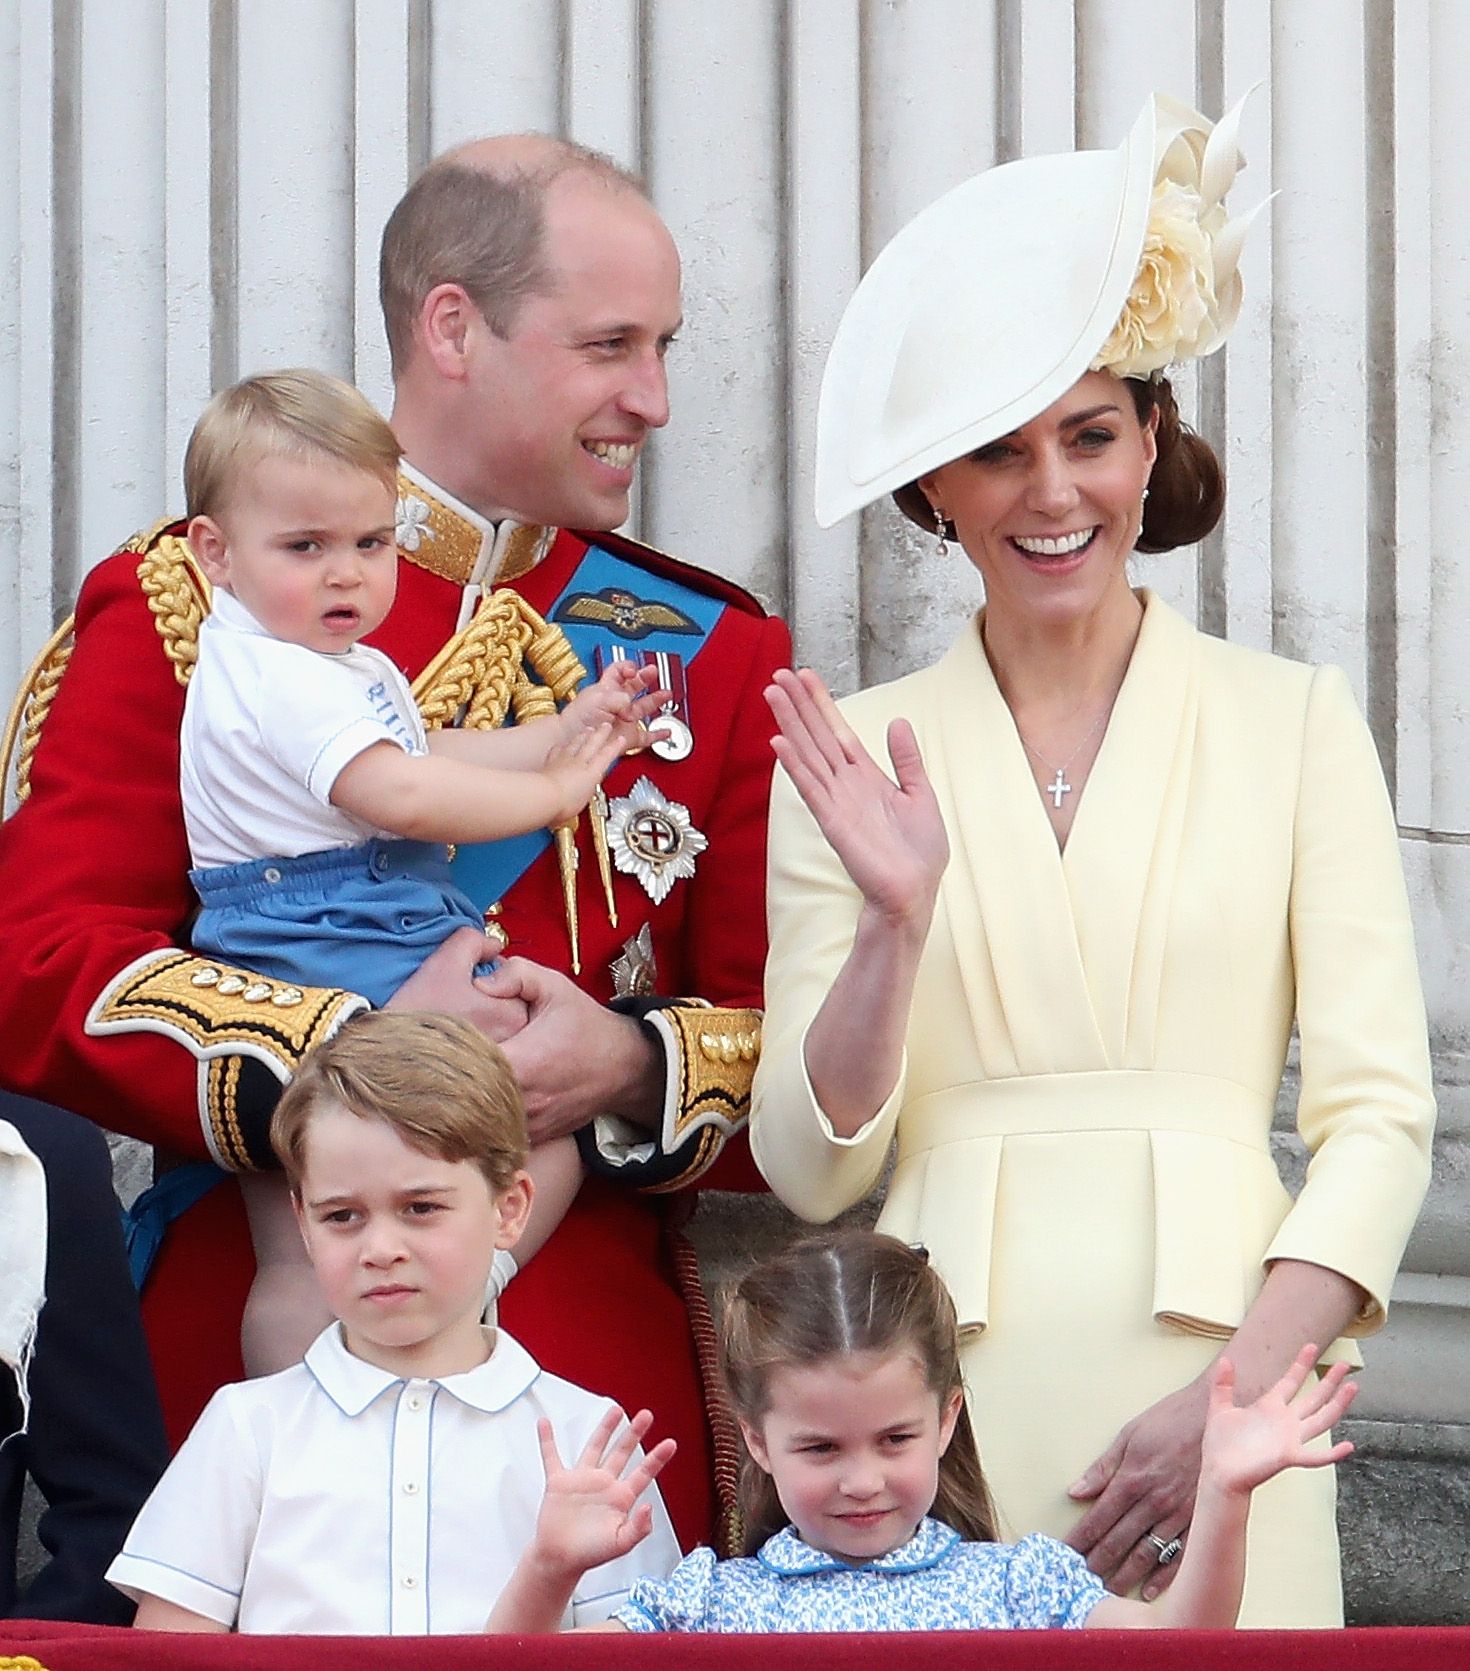 Prince William and Kate Middleton with Prince Louis, Prince George and Princess Charlotte during Trooping The Colou, on June 8, 2019 in London, England | Photo: Chris Jackson/Getty Images